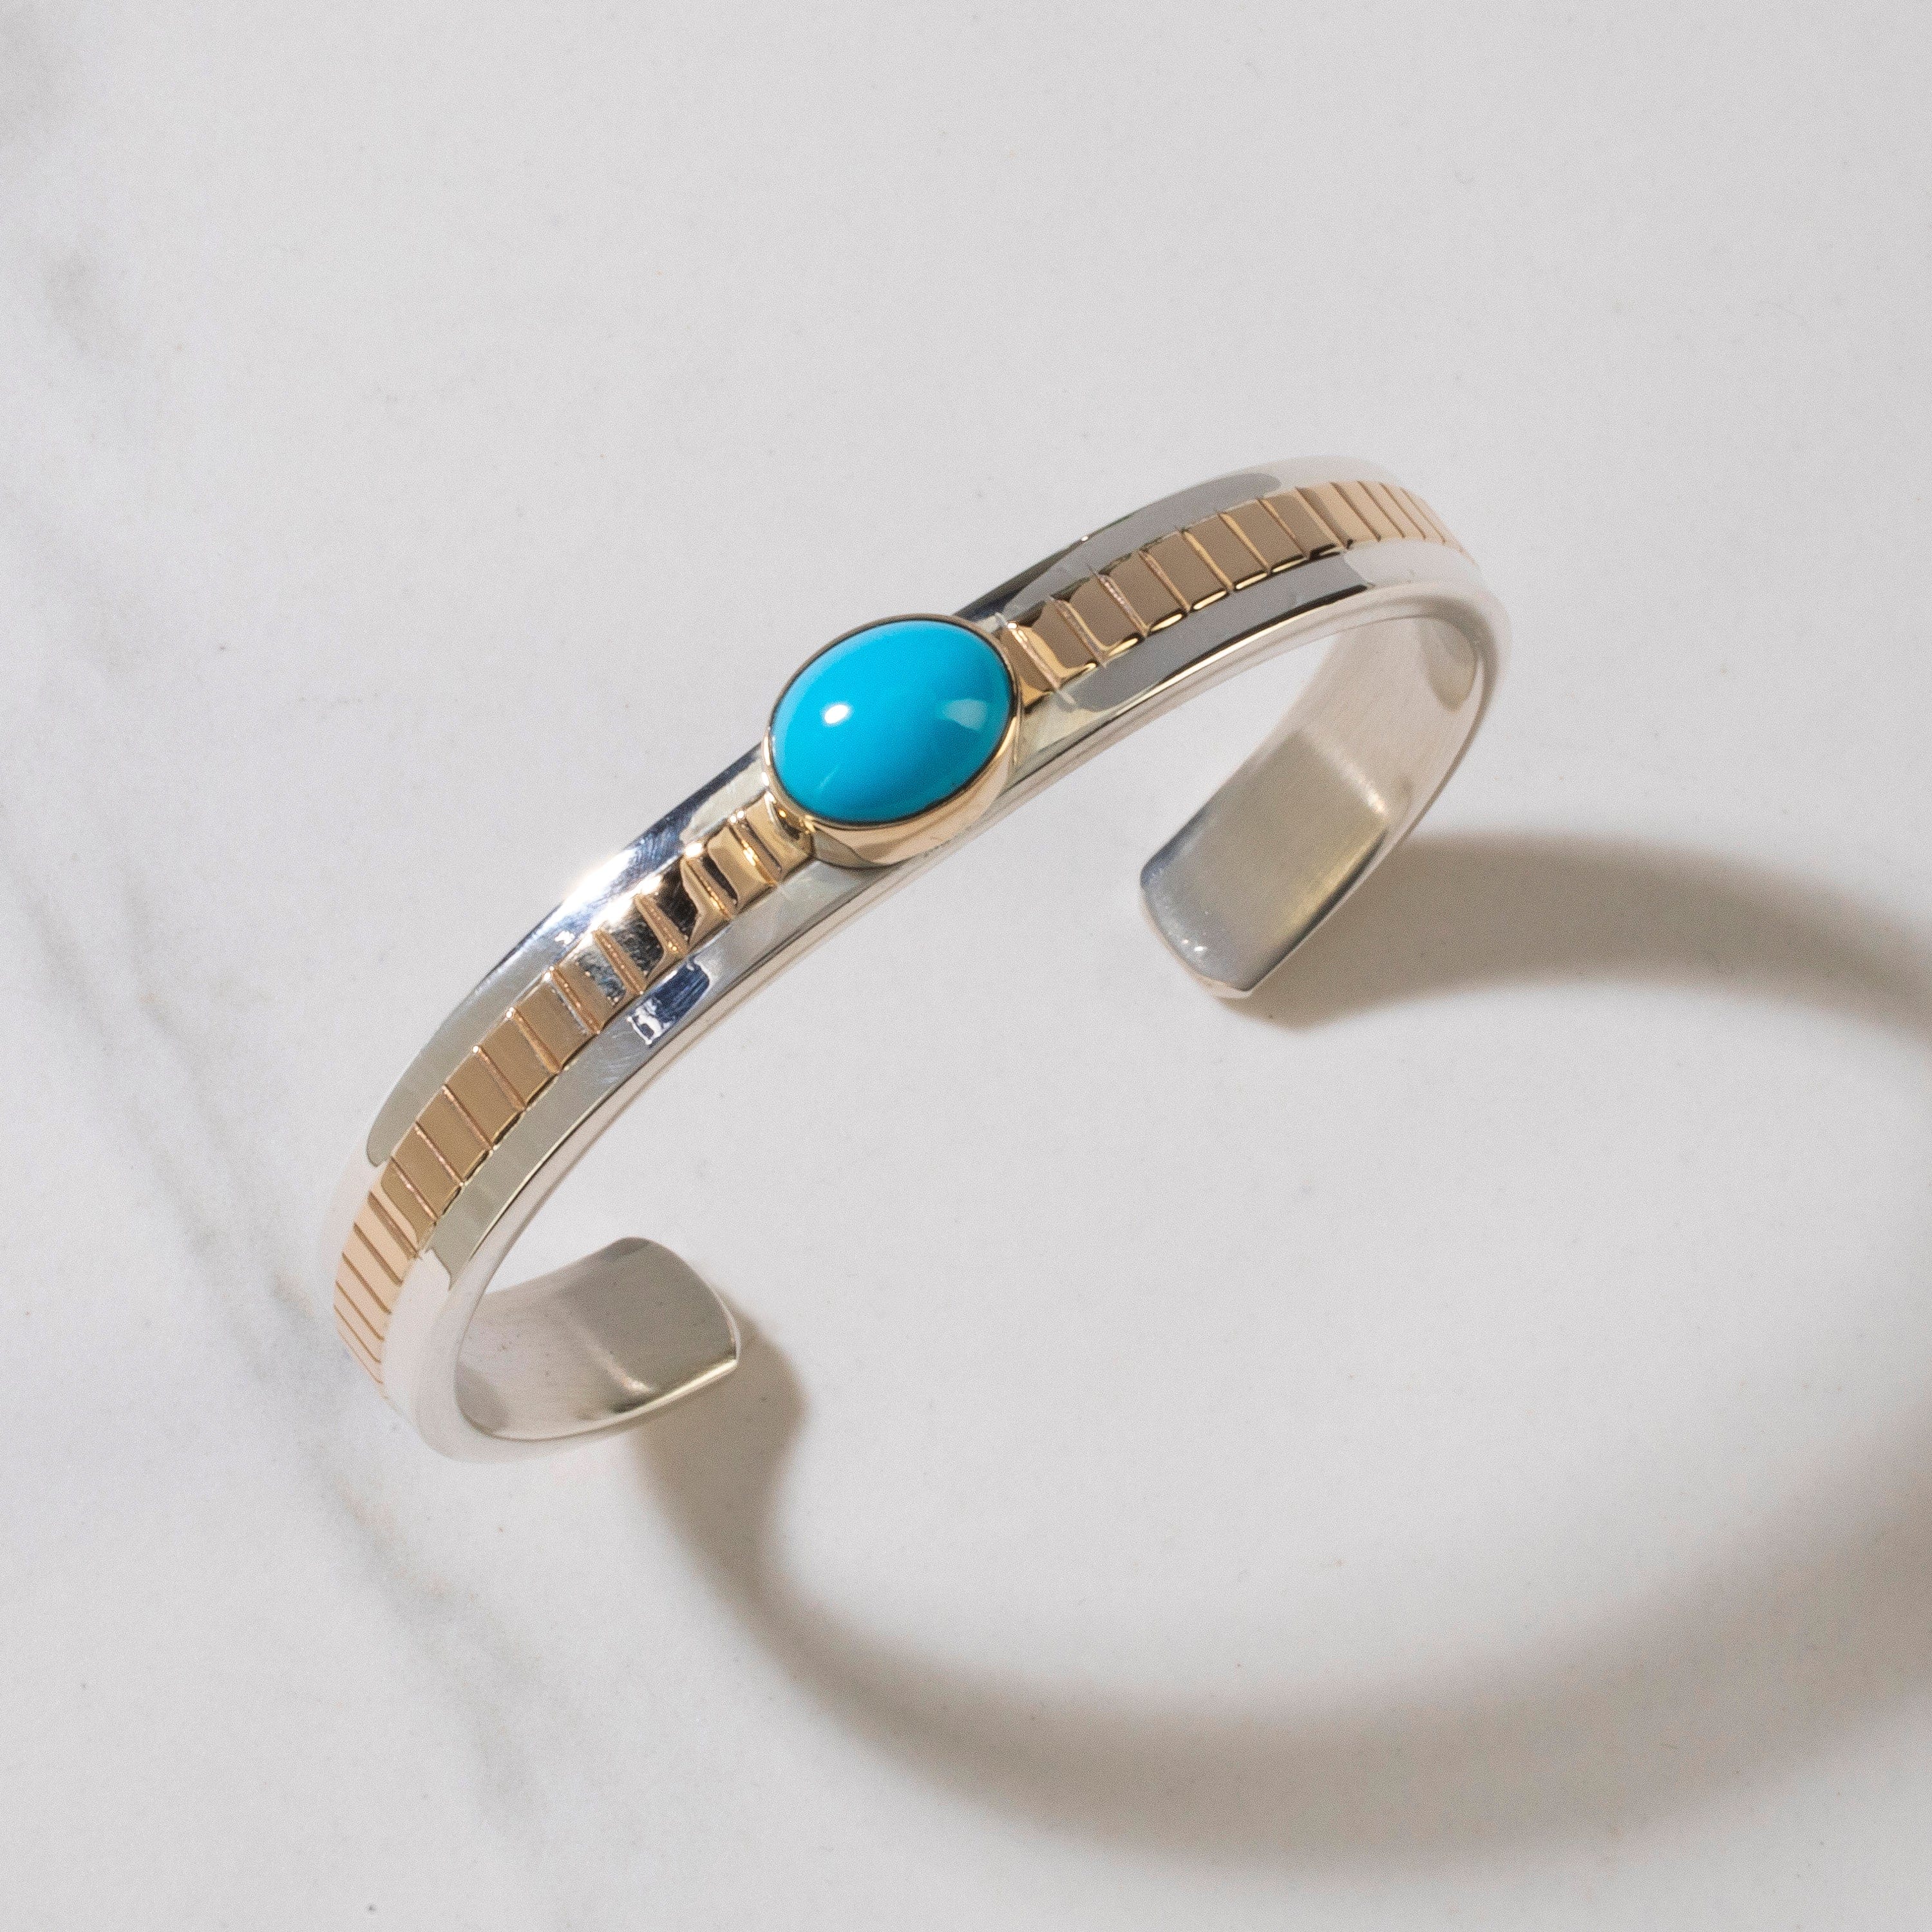 Kalifano Native American Jewelry Ray Bennett Navajo Sleeping Beauty Turquoise & 14K Gold USA Native American Made 925 Sterling Silver Cuff NAB2800.007